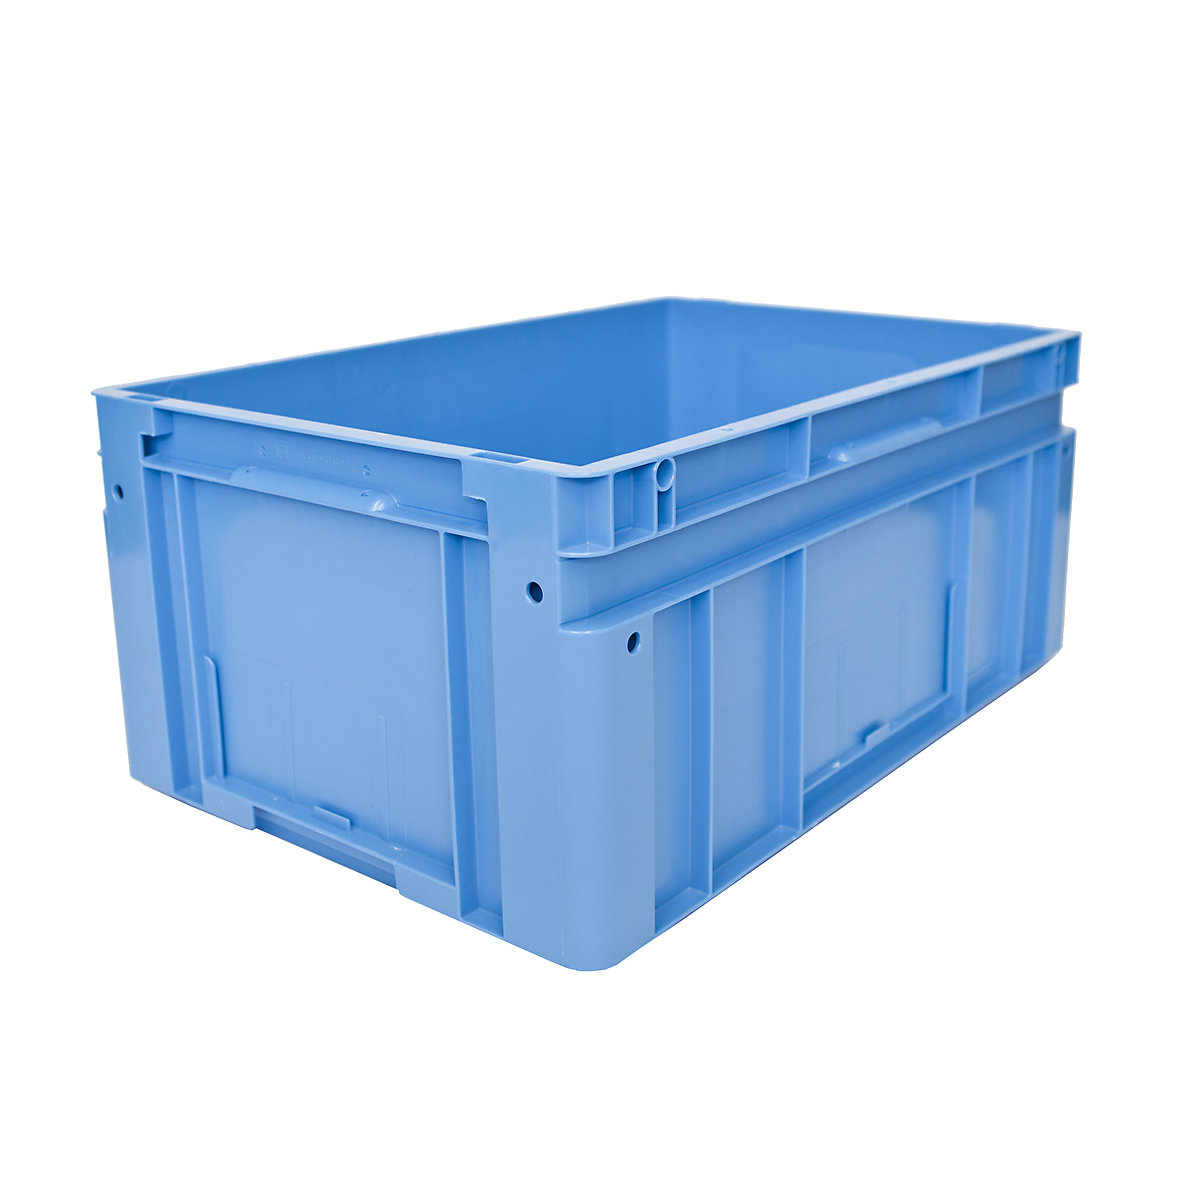 Euro size stacking containers, external LxWxH 600 x 400 x 270 mm, blue